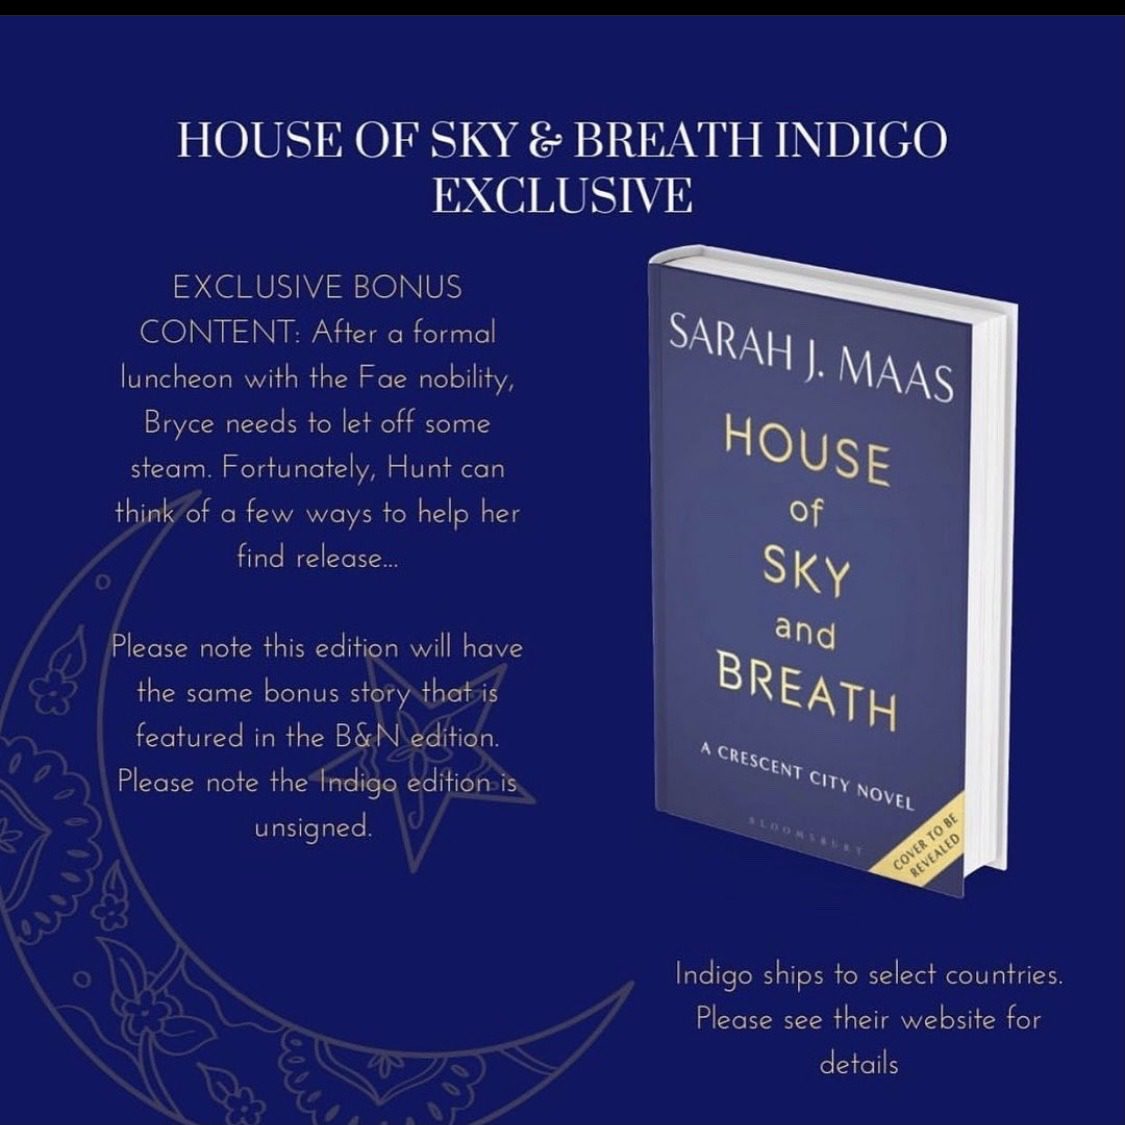 Sky House and Breathing Book Release Date